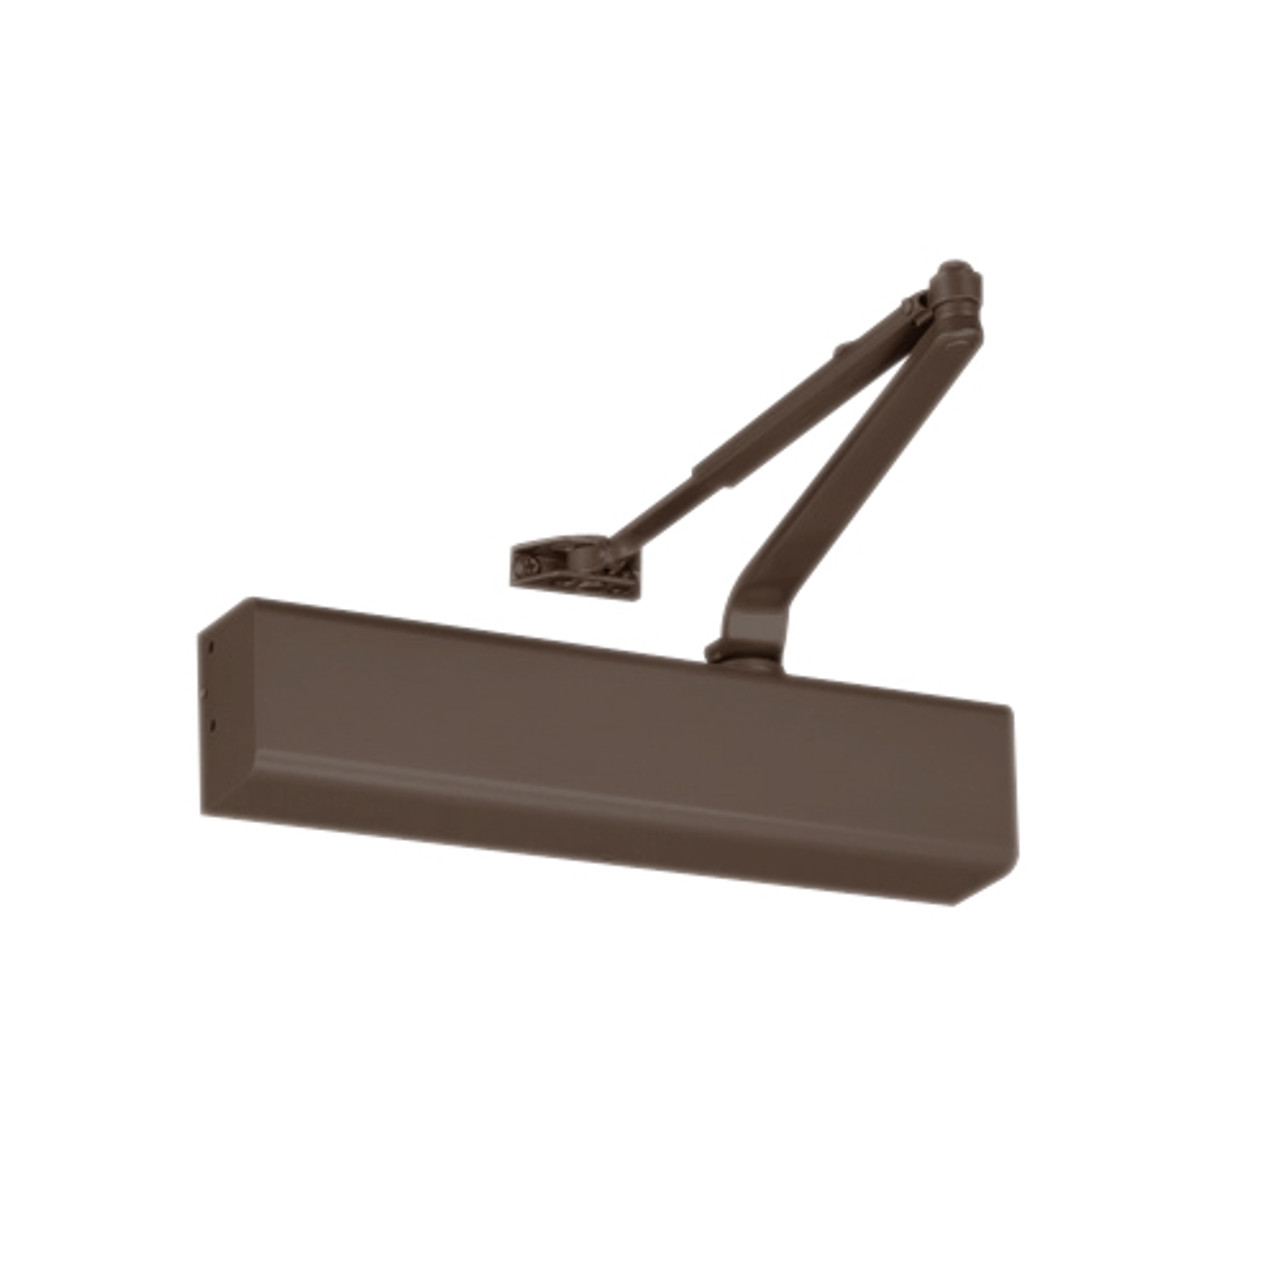 S8501A-690 Norton 8000 Series Full Cover Non-Hold Open Door Closers with Regular Arm Application in Statuary Bronze Finish